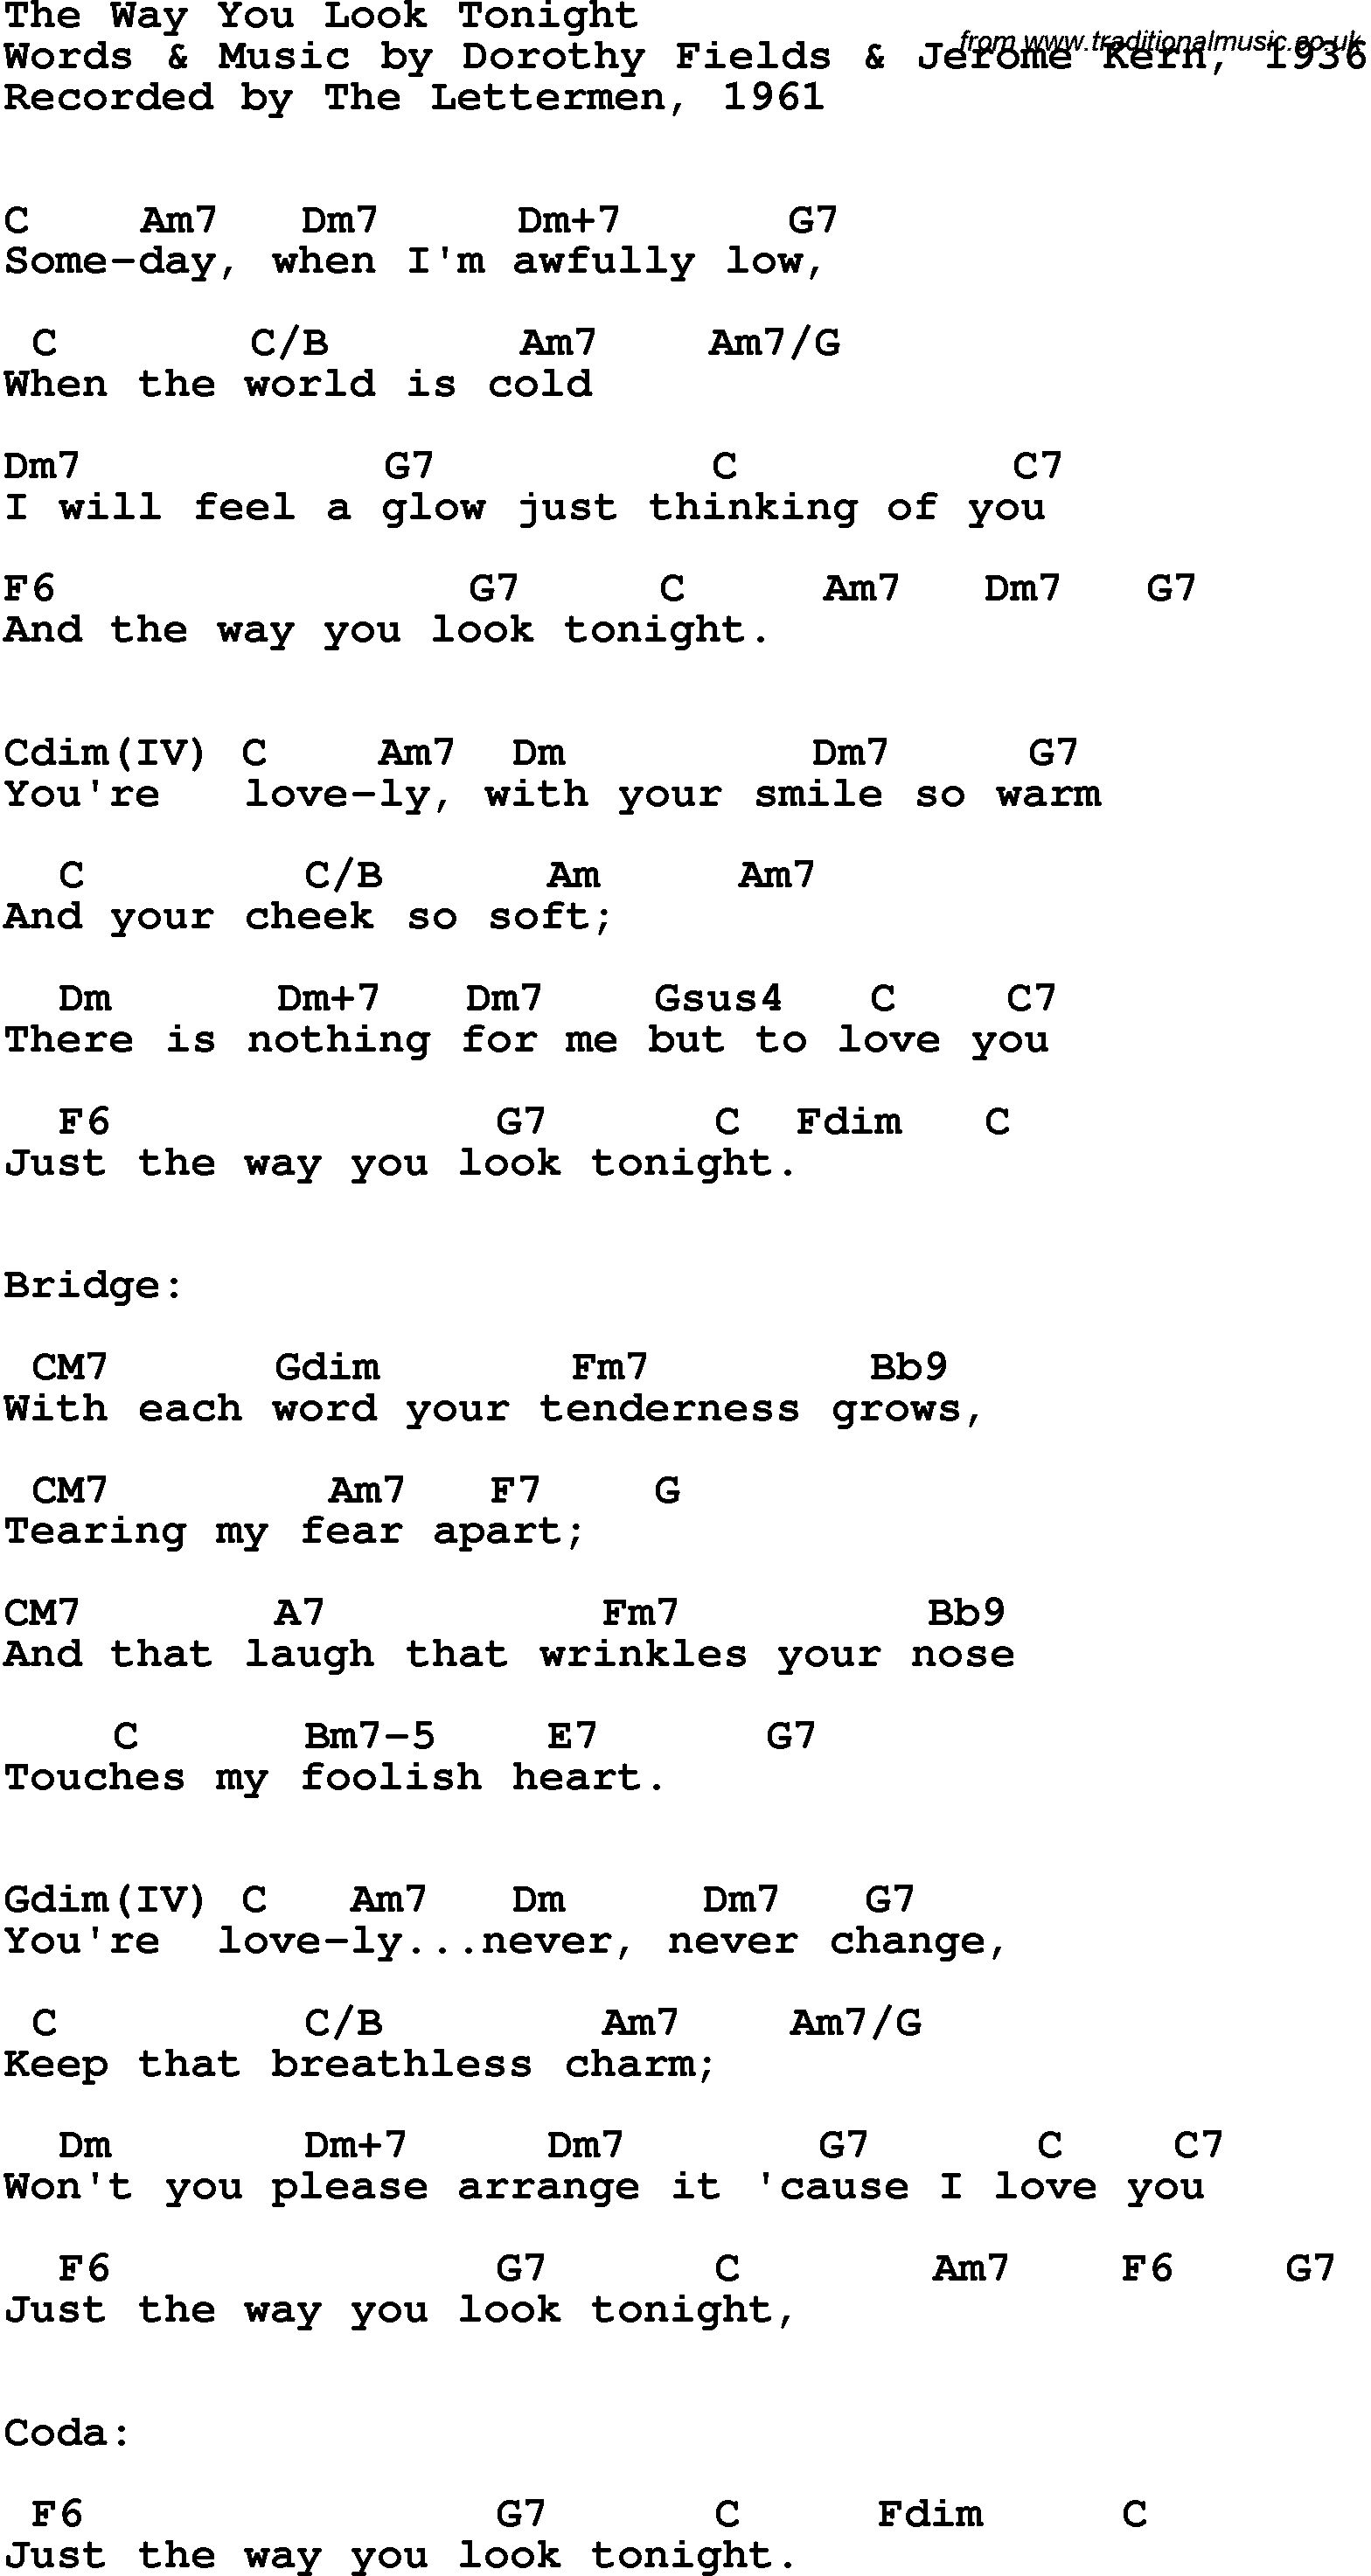 Song Lyrics with guitar chords for Way You Look Tonight, The - The Lettermen, 1961